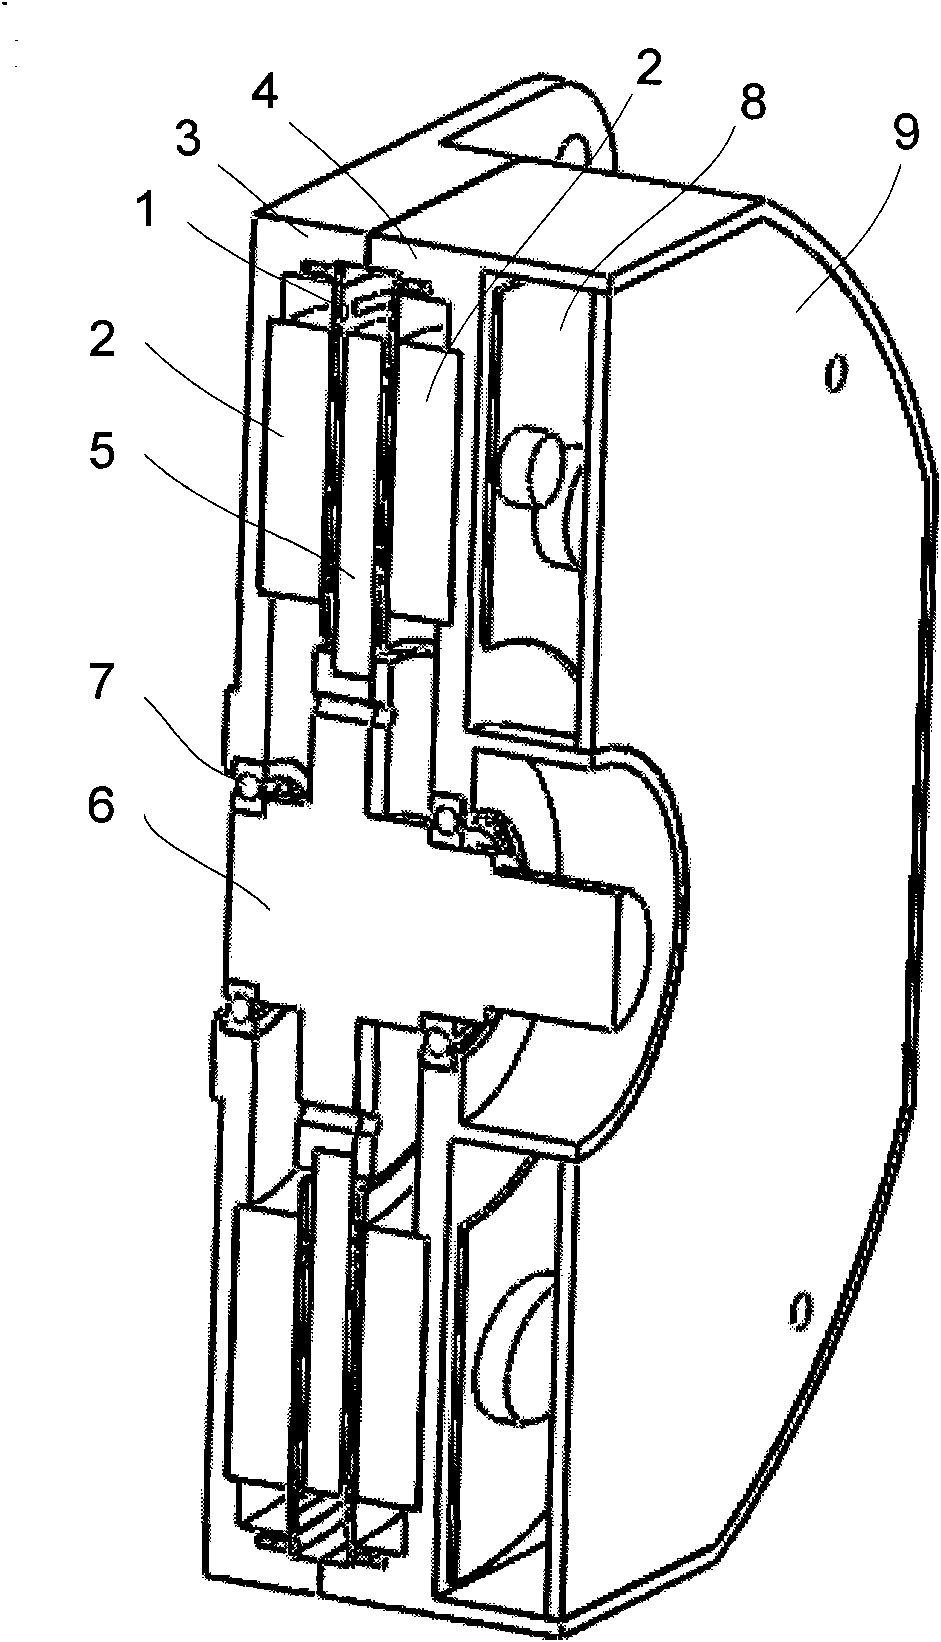 Disc type permanent magnet motor comprising winding in printed circuit board structure